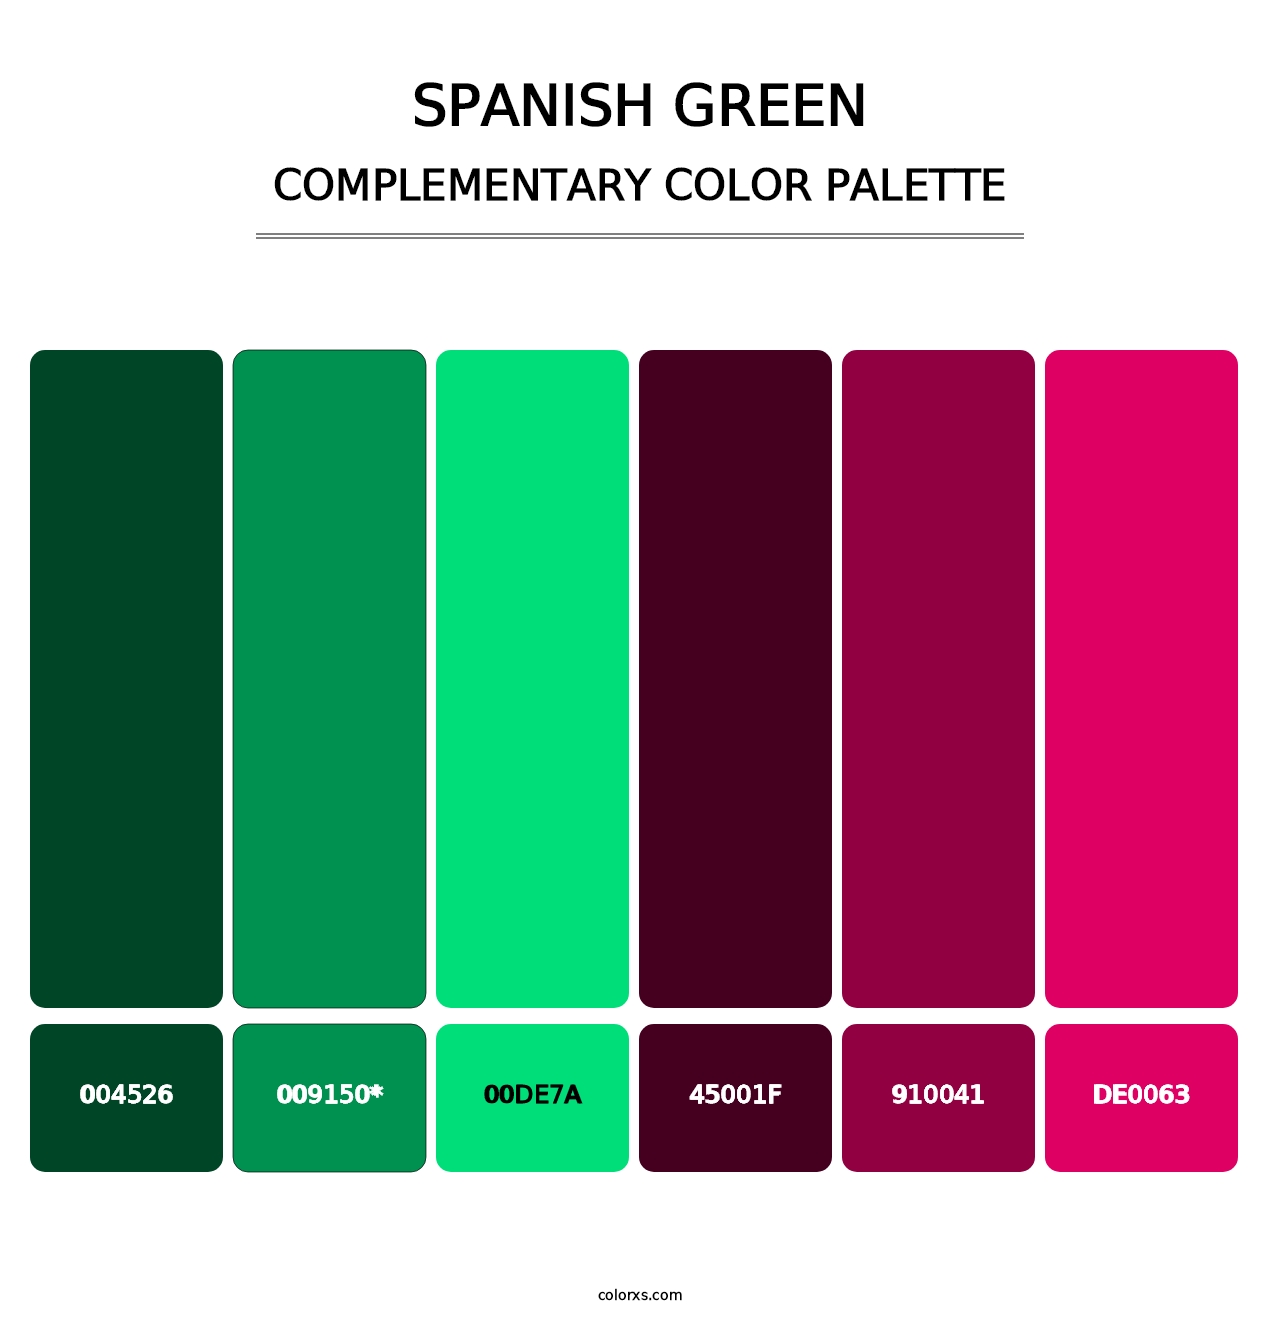 Spanish Green - Complementary Color Palette